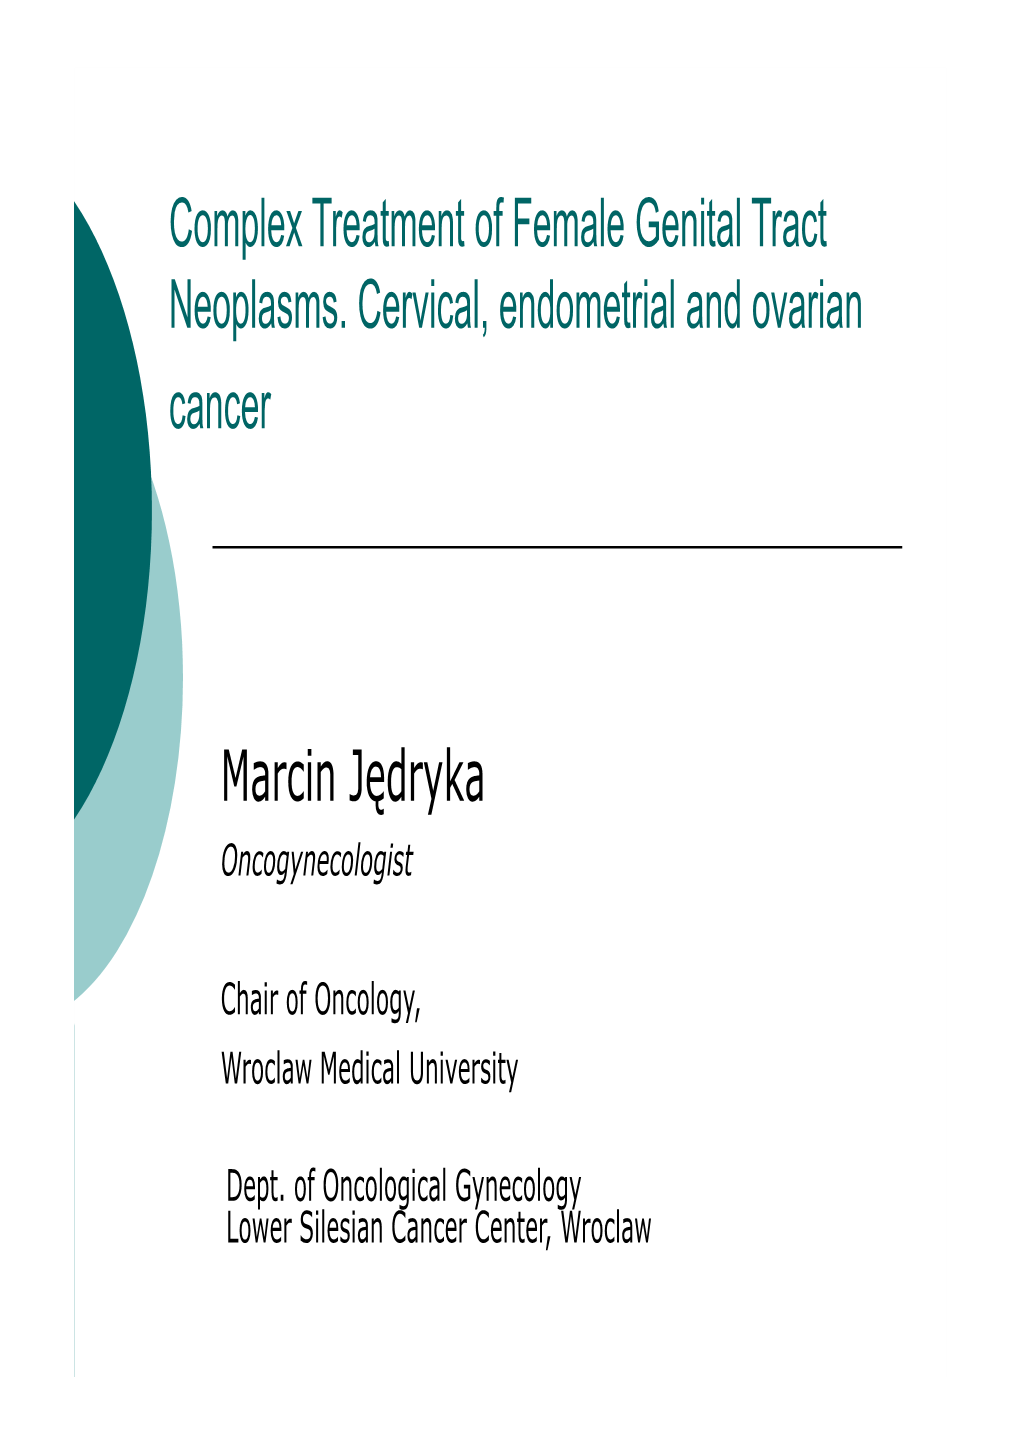 Treatment of Cervical, Endometrial and Ovarian Cancer